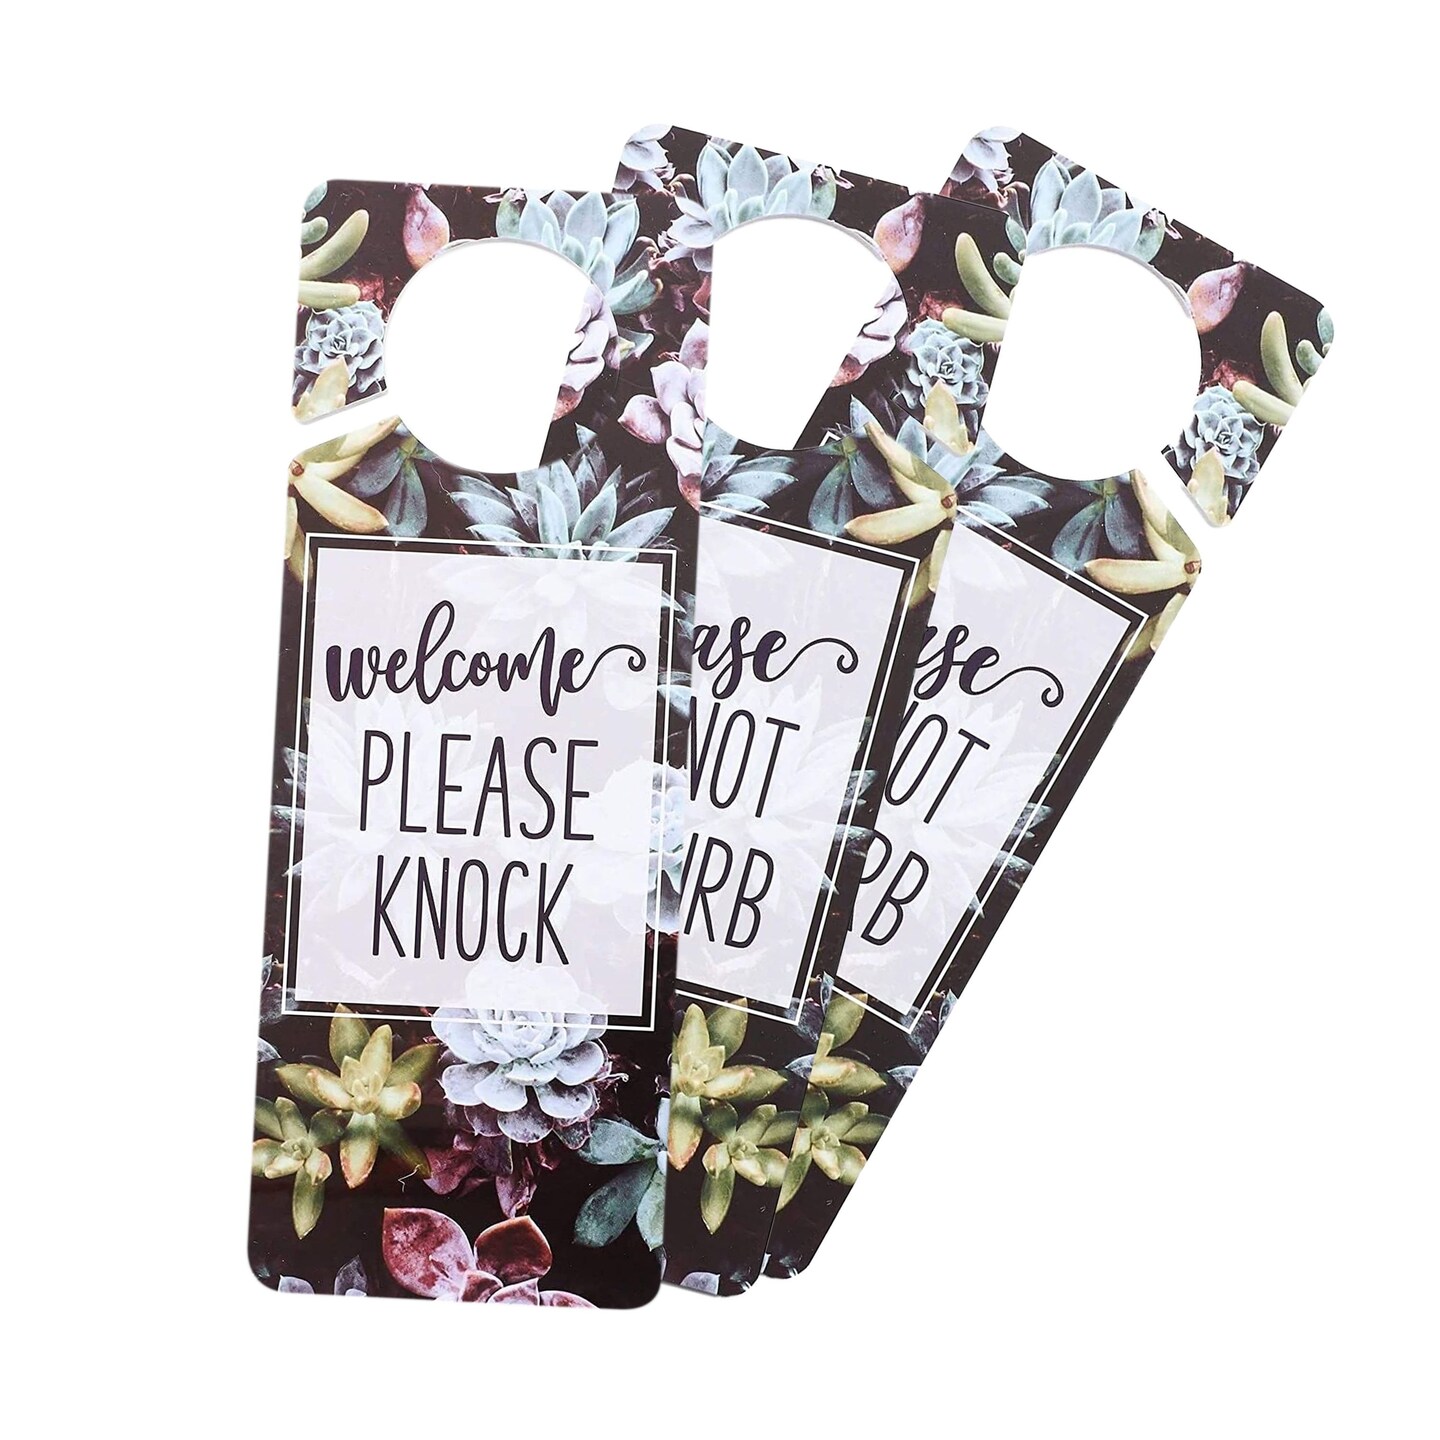 3 Pack Do Not Disturb Door Hanger Sign, Welcome Please Knock, Double Sided (Succulents)